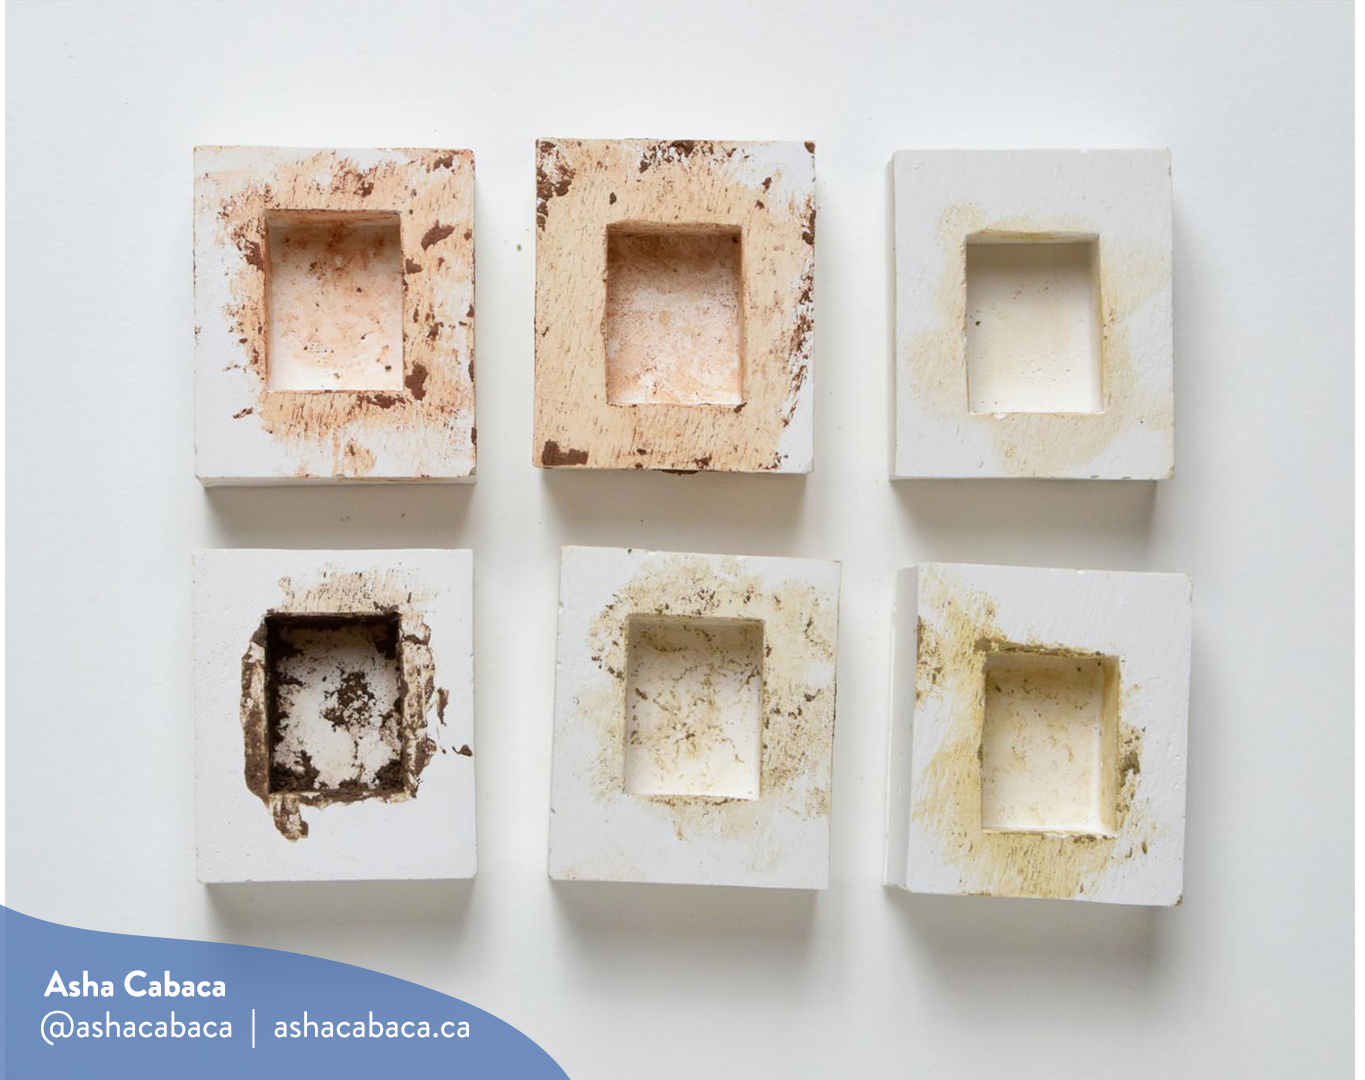 Horizontal photo of artwork by Asha Cabaca, it features six moulds used for shaping six kinds of mud/clay on a white surface. There is a watermark in blue that has Asha’s name, Instagram handle (@ashacabaca) and website (ashacabaca.ca).